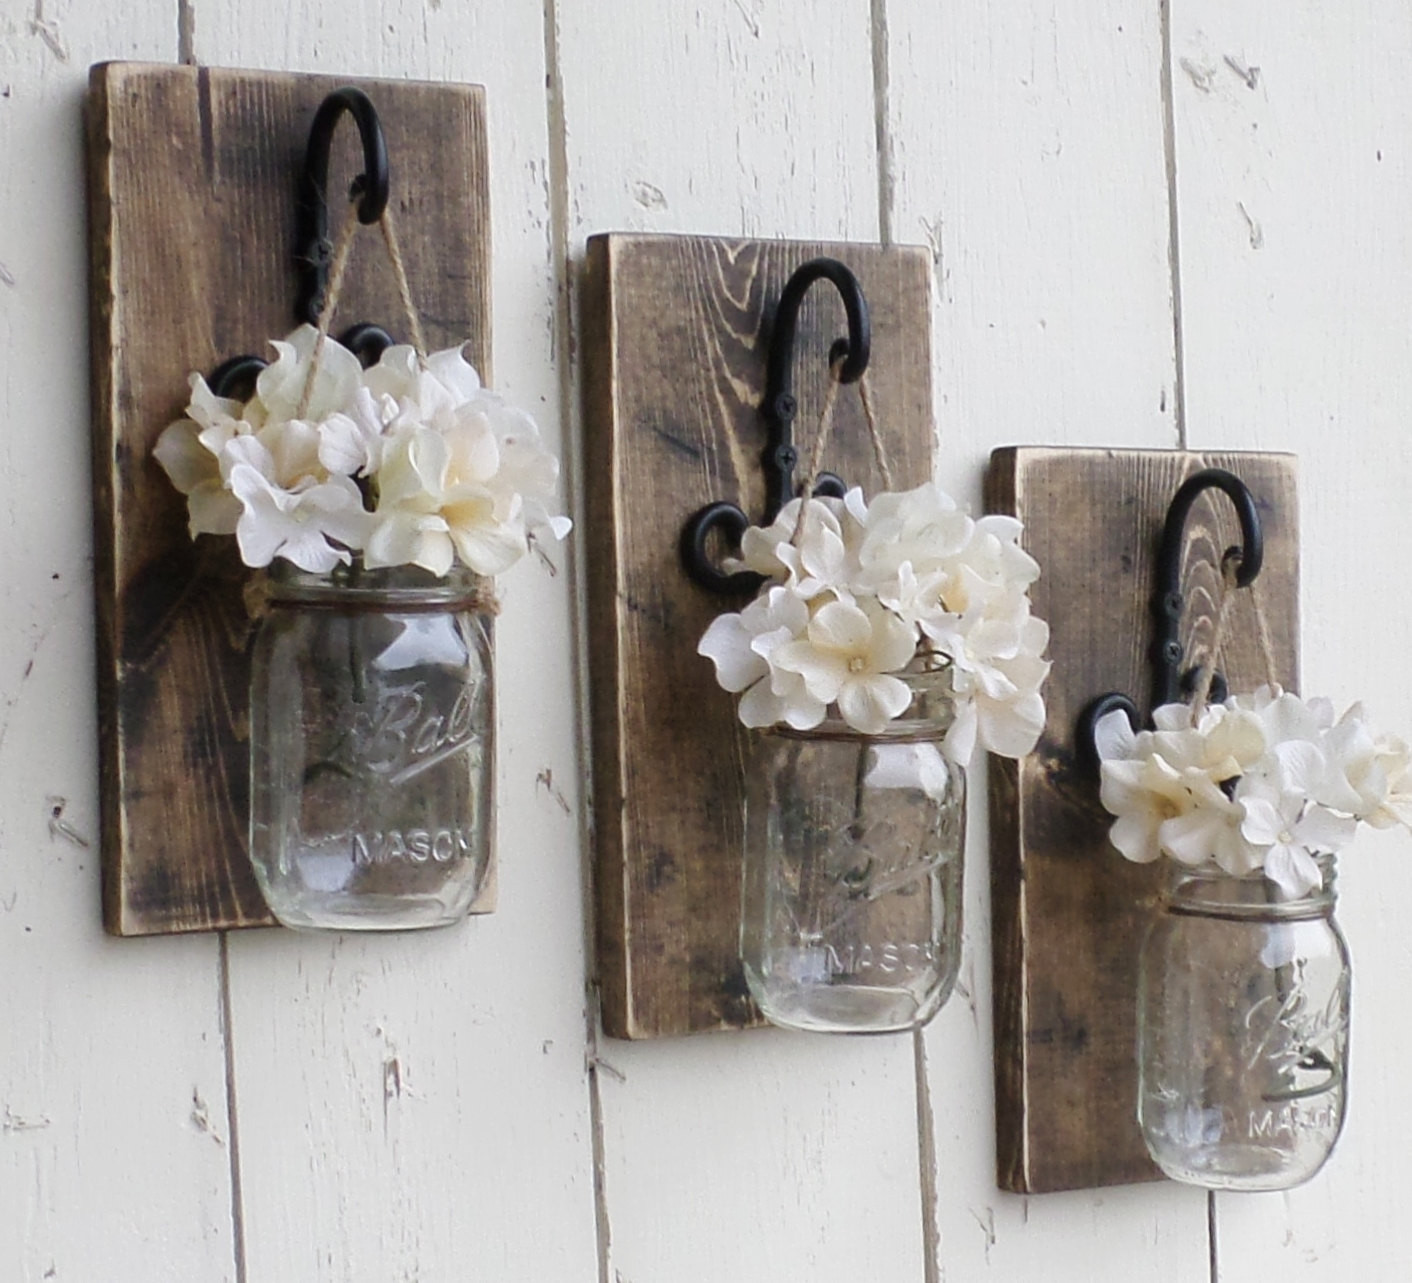 Rustic Kitchen Wall Art
 NEW Rustic Farmhouse Wood Wall Decor 3 by